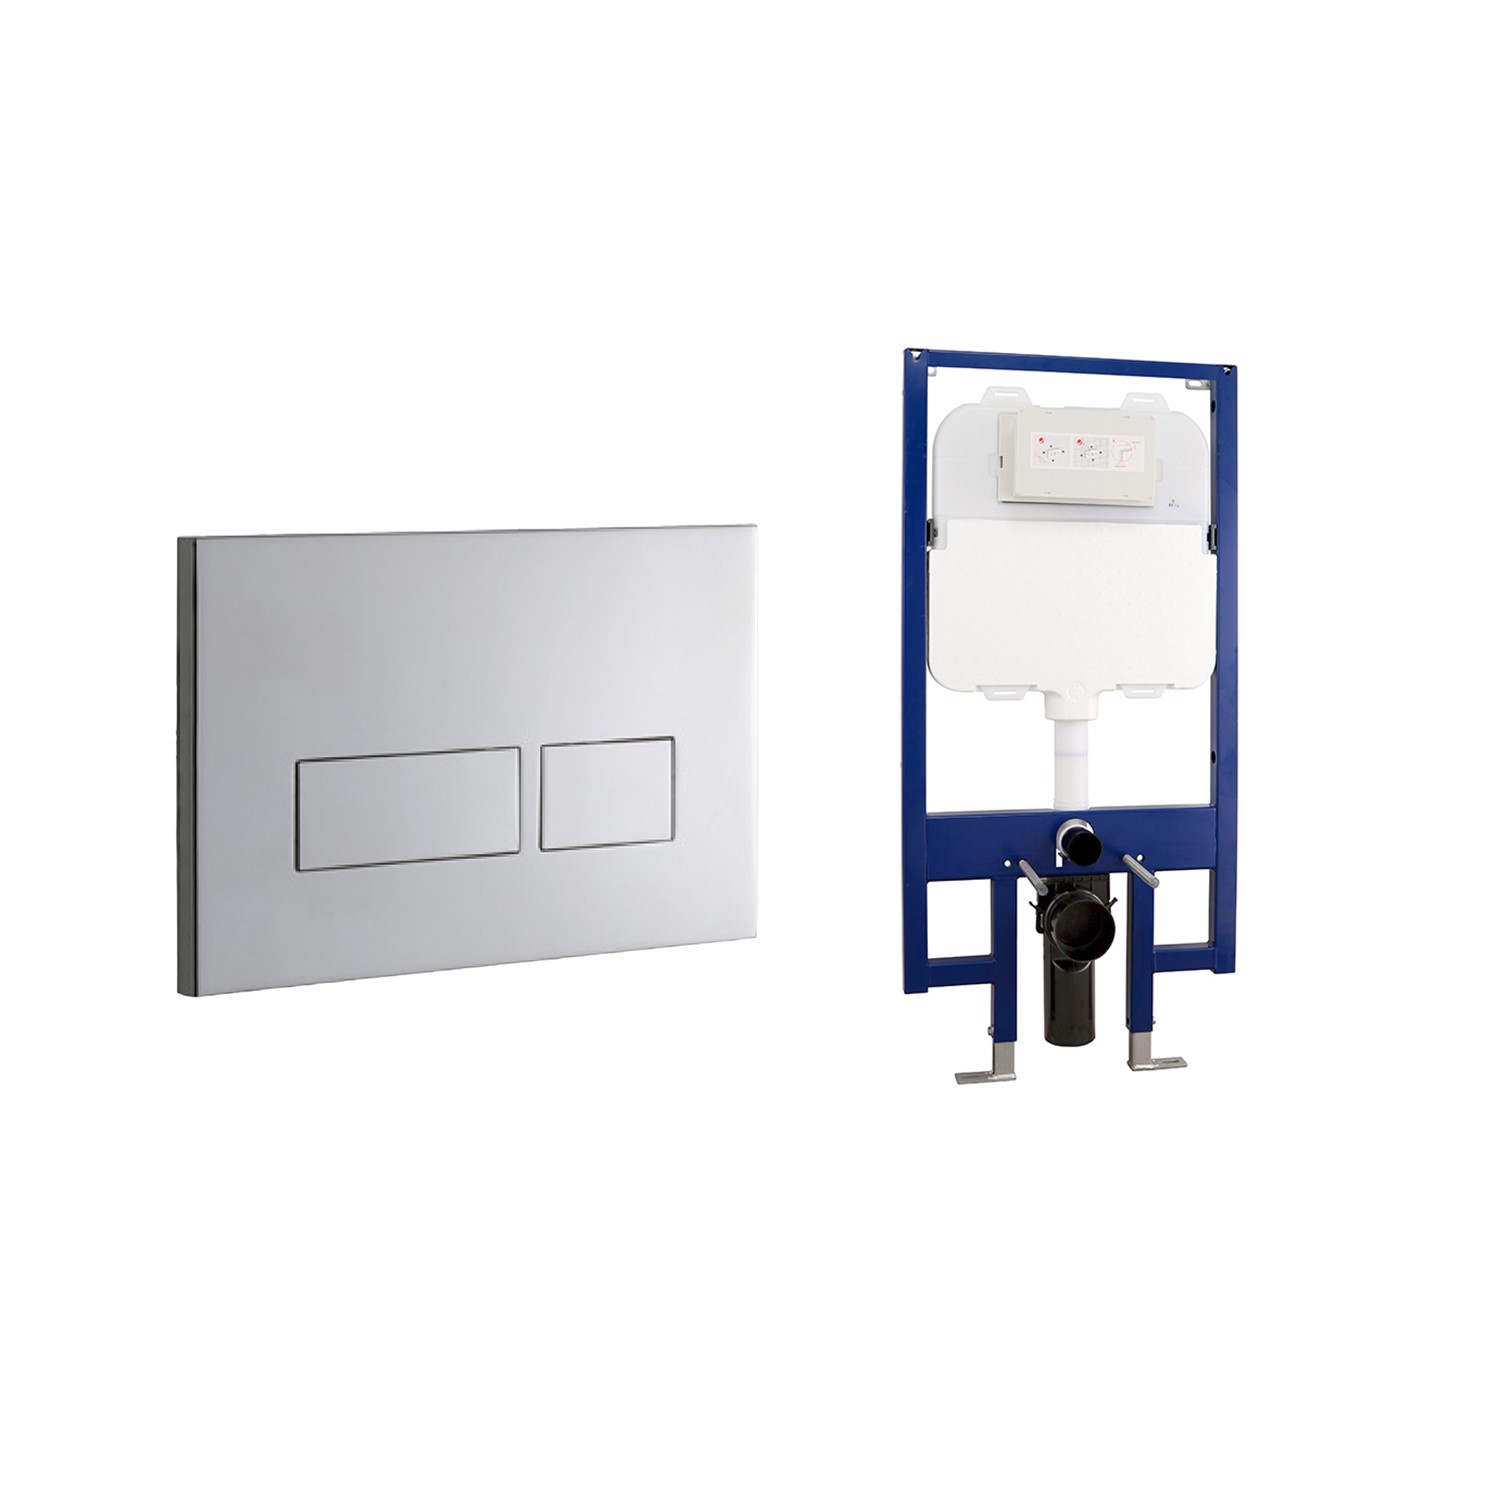 Brushed Nickel Satin Flush Plate with Slimline 90mm WC Frame and Dual Flush Cistern